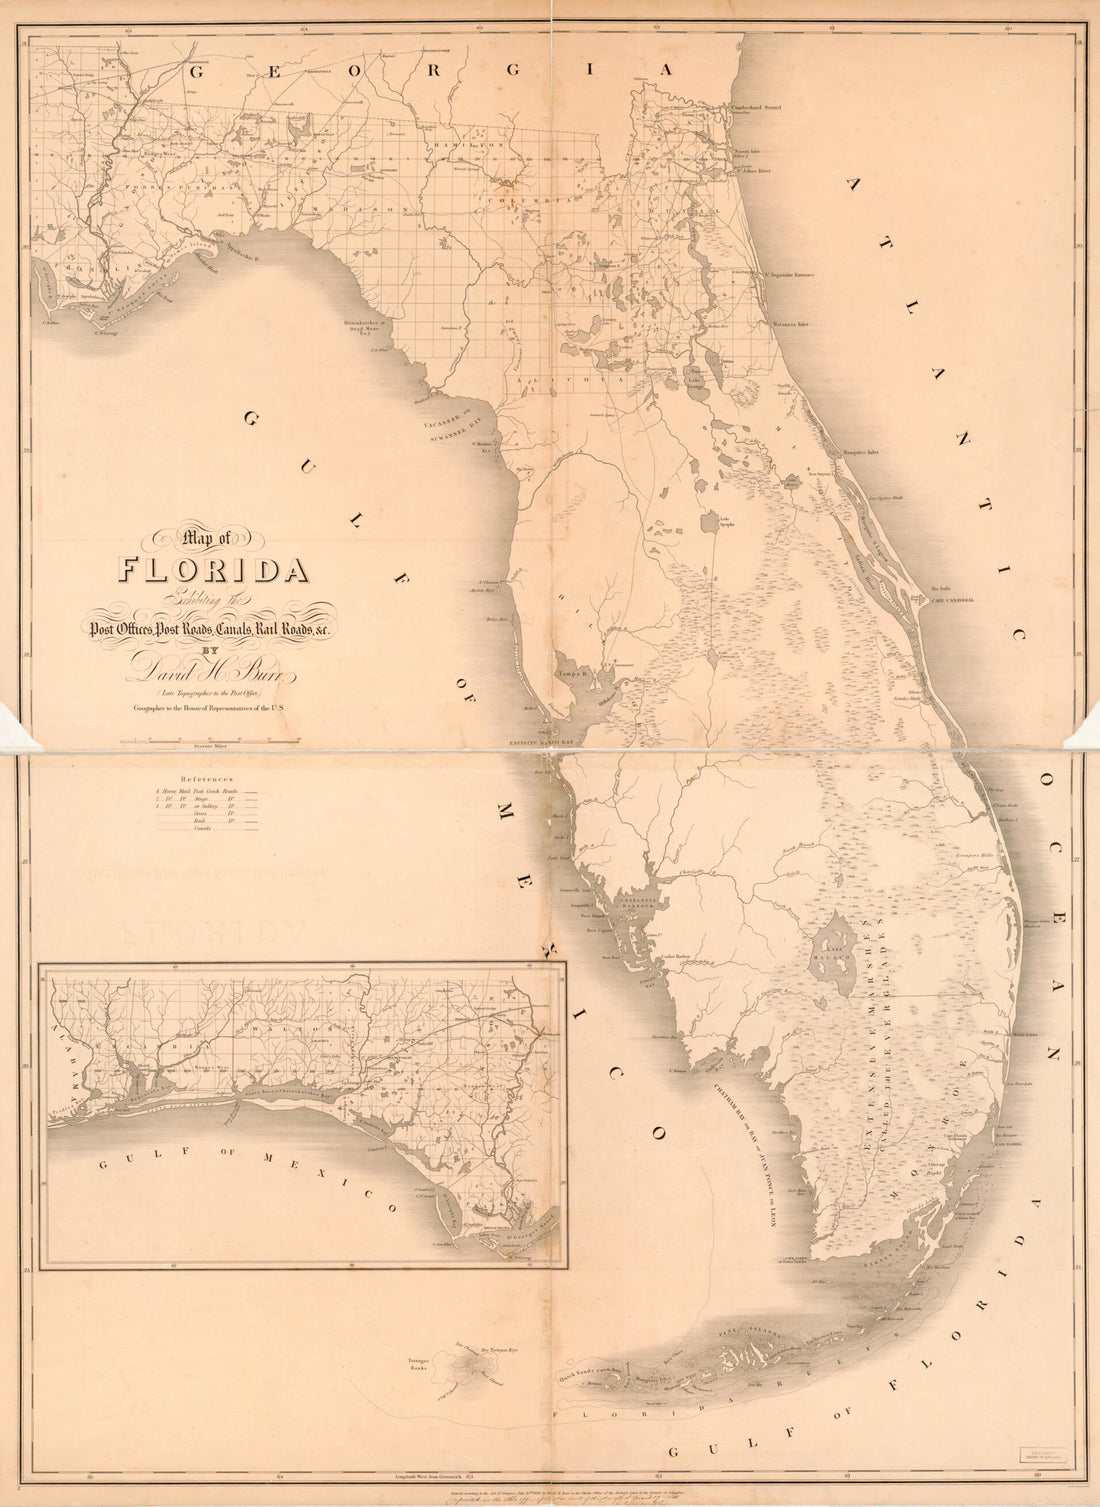 This old map of Map of Florida : Exhibiting the Post Offices, Post Roads, Canals, Rail Roads, &amp;c from 1841 was created by John Arrowsmith, David H. Burr in 1841